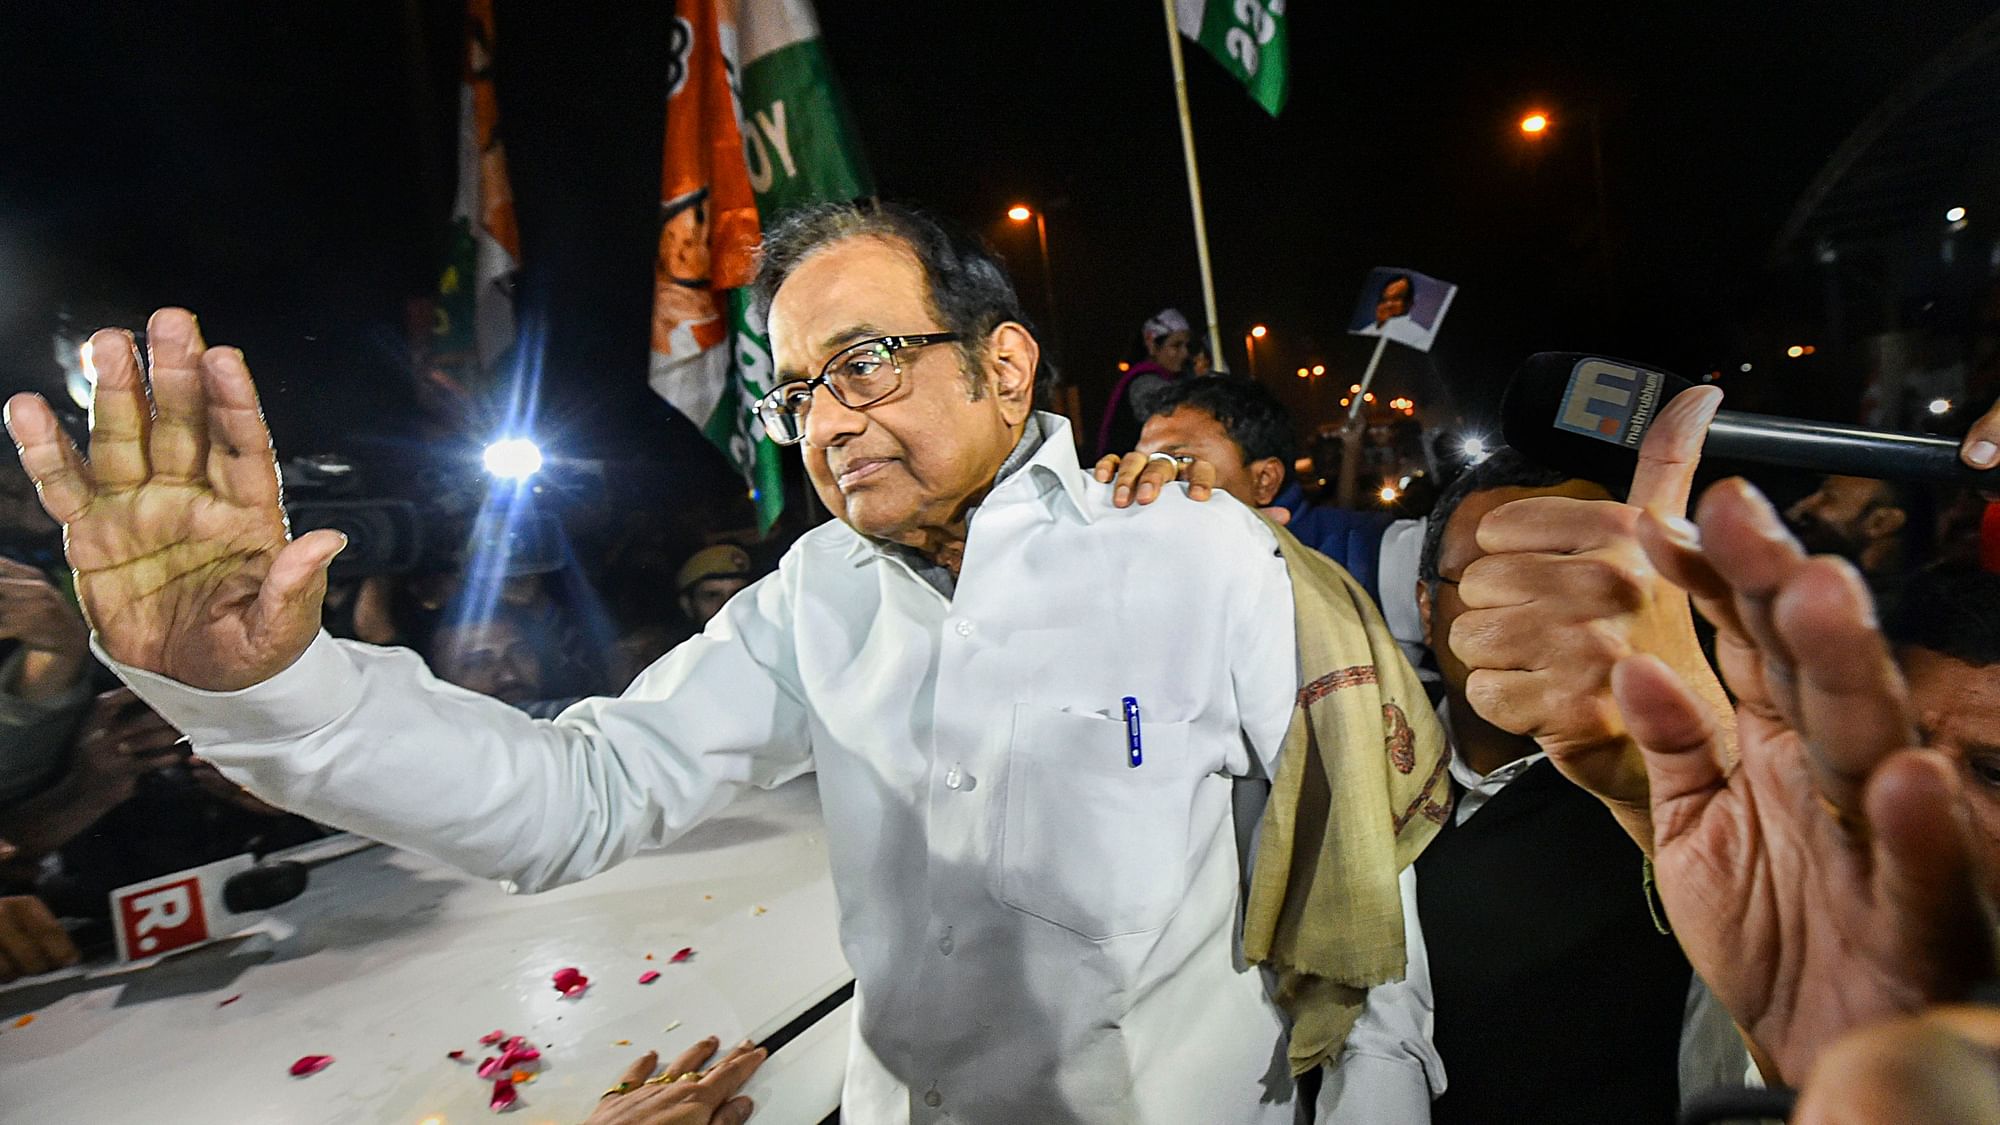 Senior Congress leader P Chidambaram waves at Congress workers and supporters after he was released from Tihar jail in New Delhi, Wednesday night, Dec. 4, 2019.